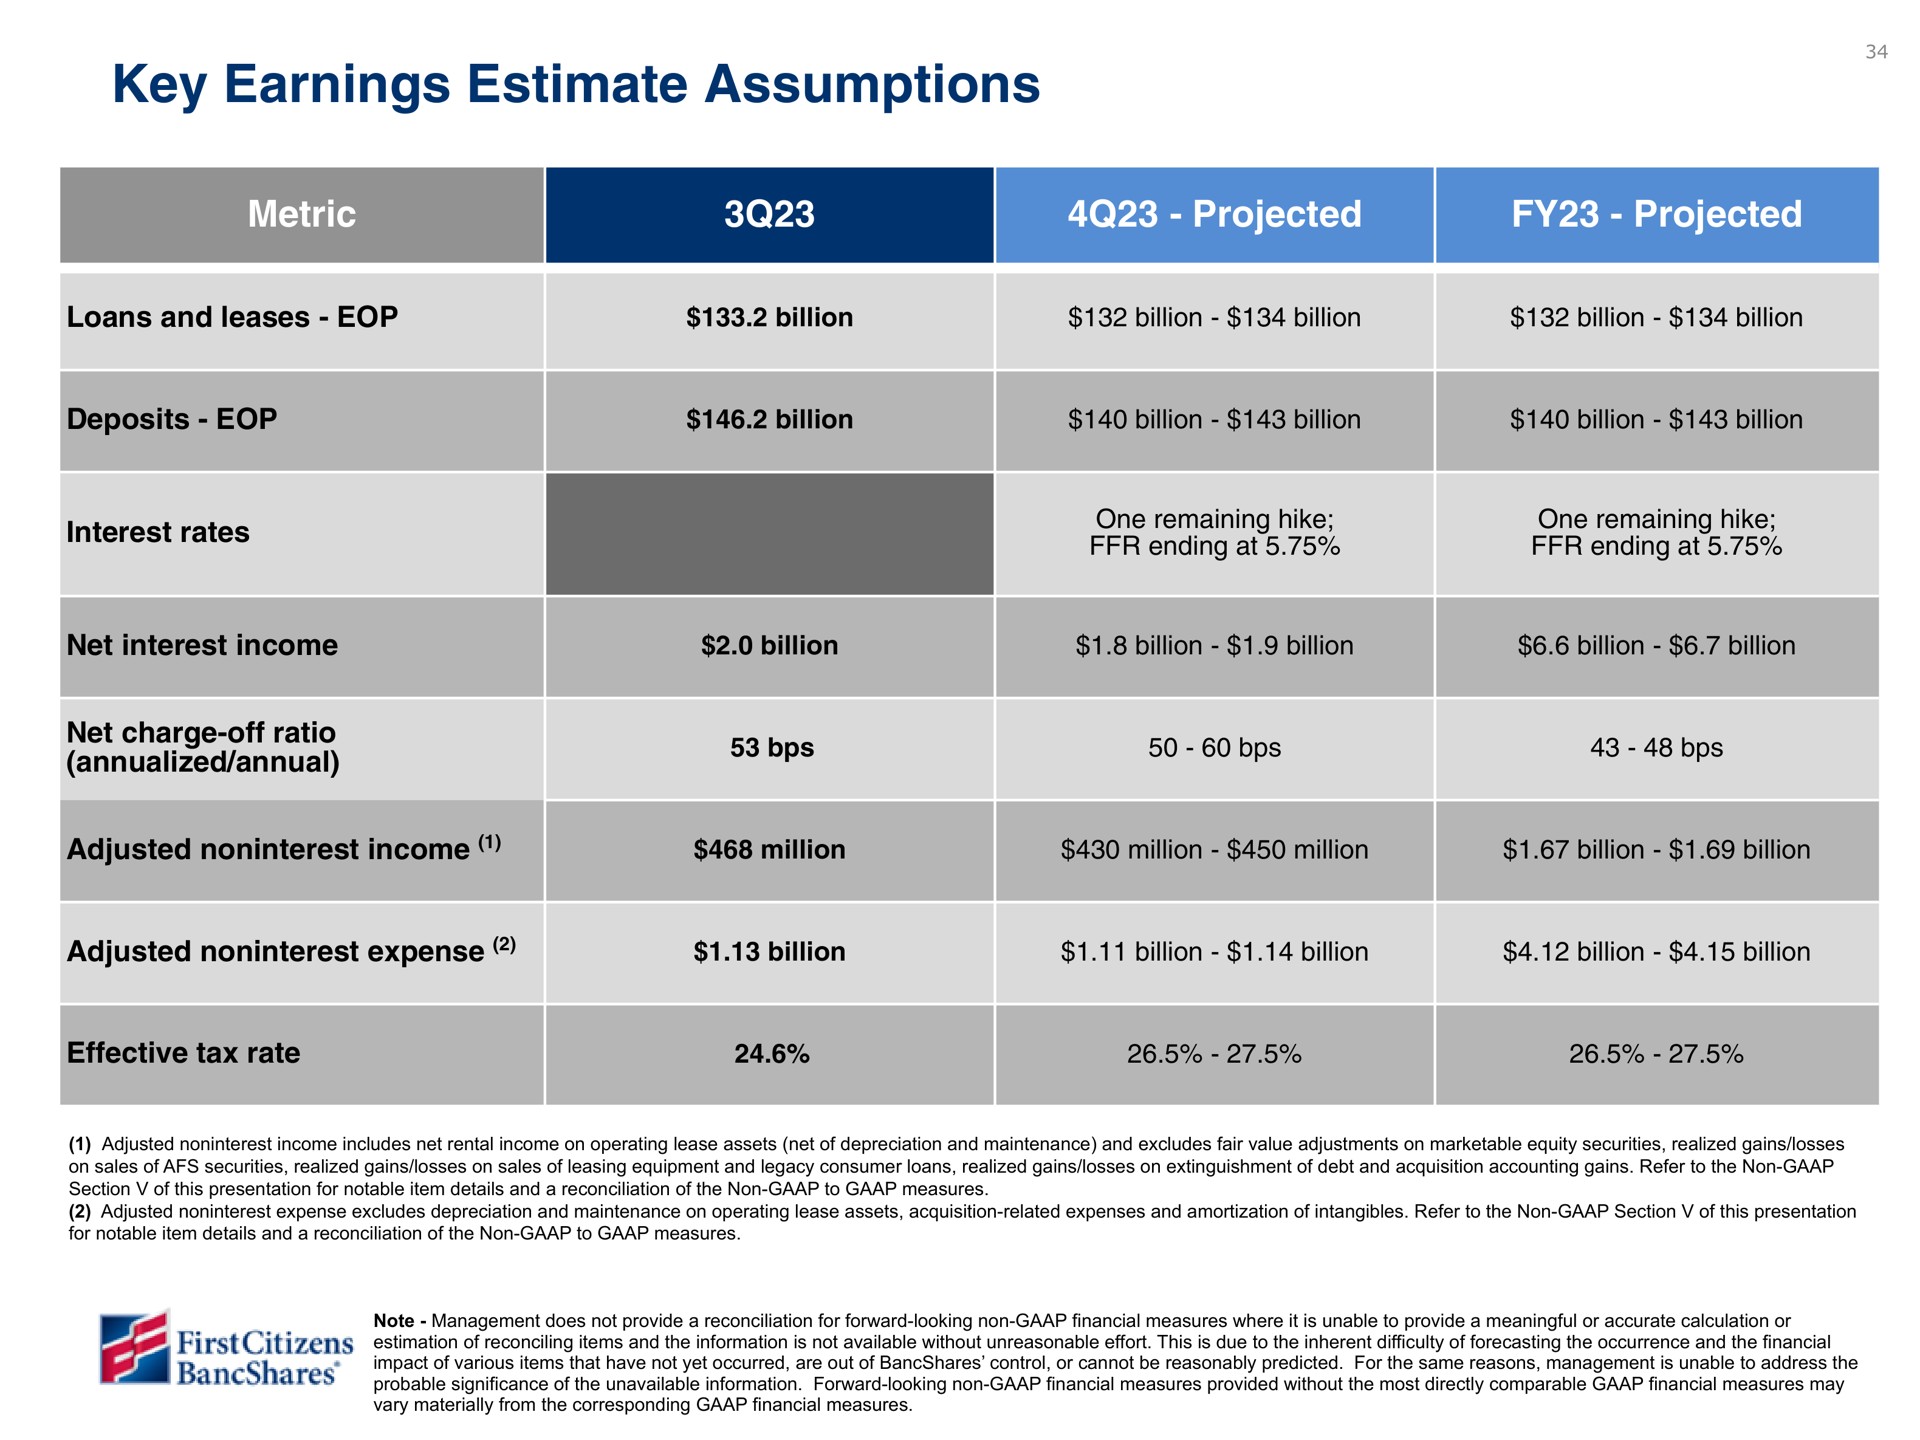 key earnings estimate assumptions metric projected projected interest rates aes aes lan | First Citizens BancShares